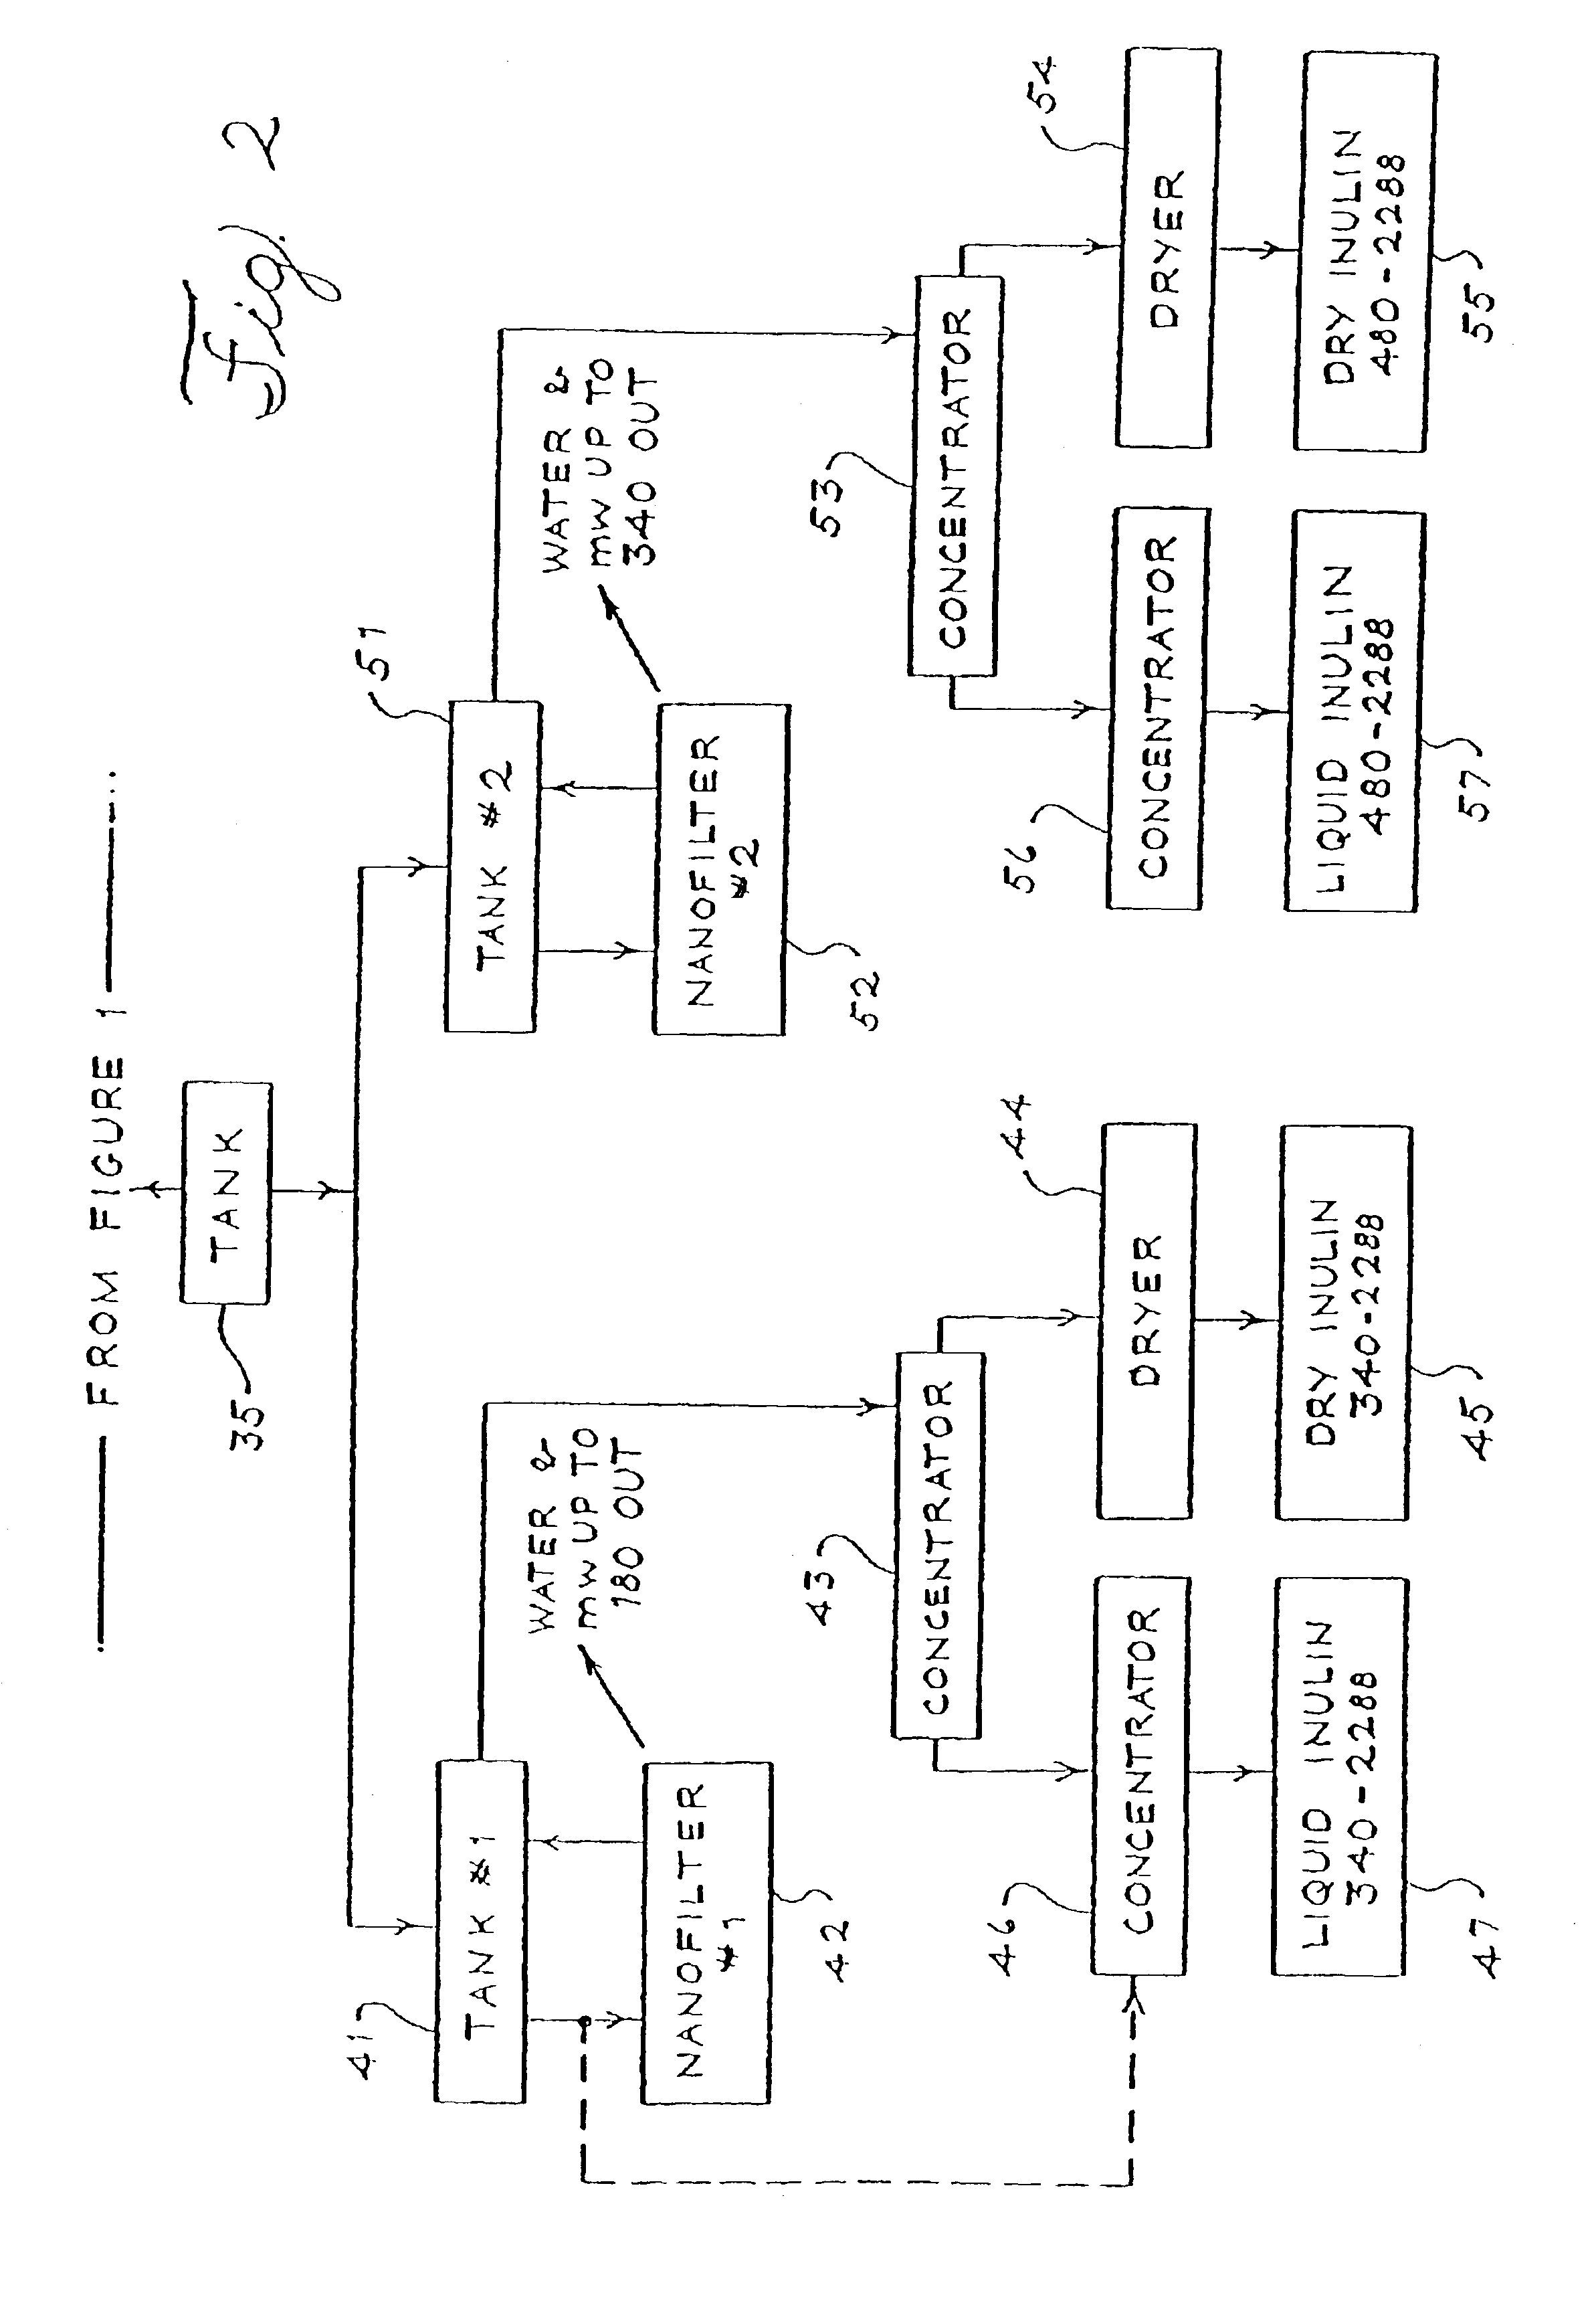 Sweetener compositions containing fractions of inulin